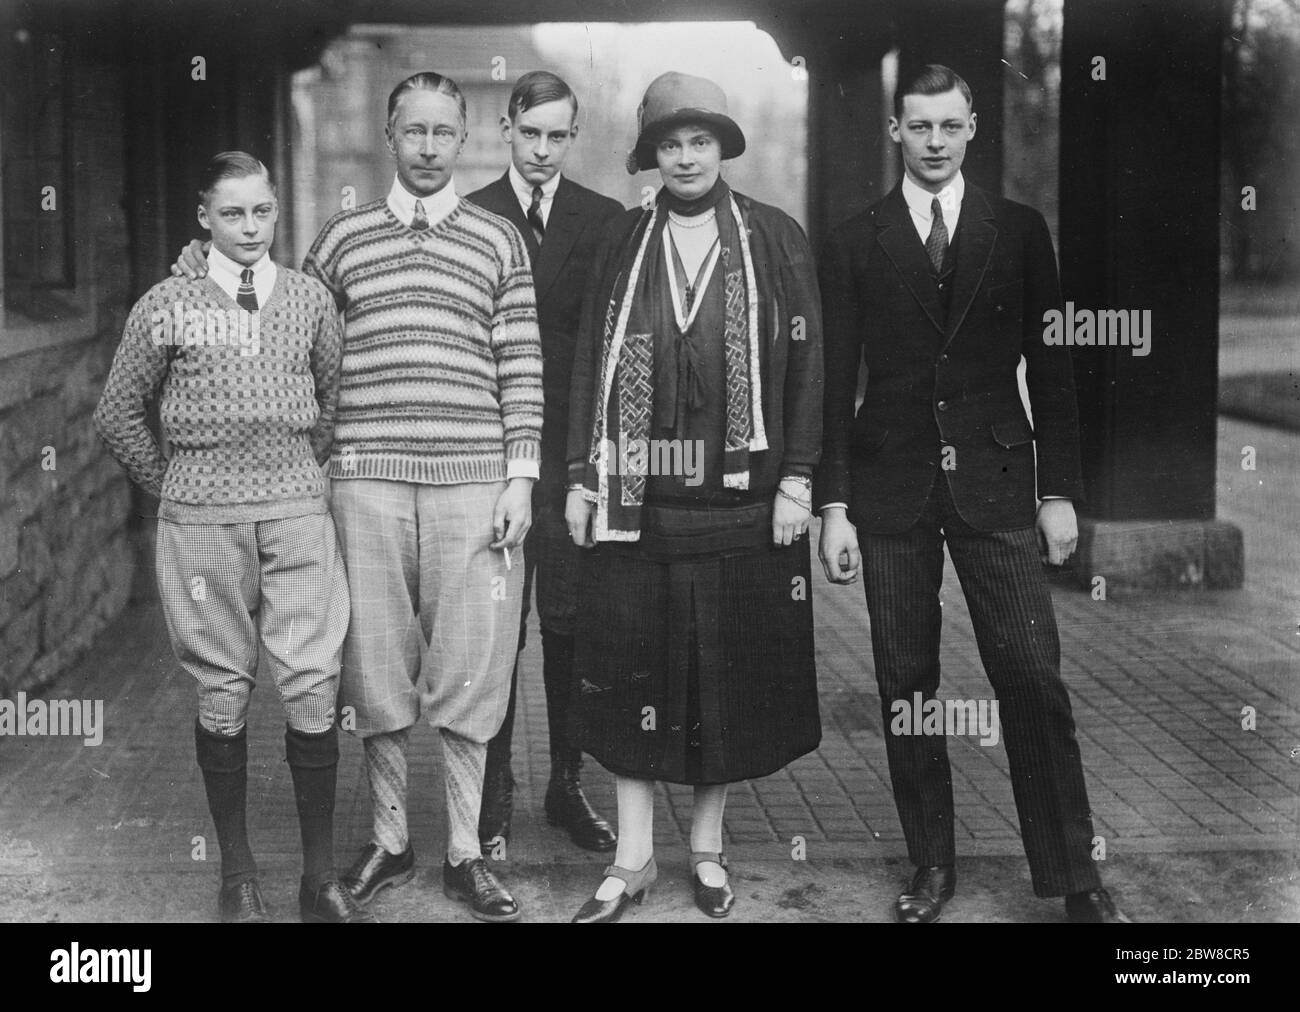 Ypungest sons of the ex Crown Prince of Germany confirmed . The latest photograph of the ex Crown Prince and Princess with their sons . Behind the ex Crown Prince is Prince Hubertus and on his left Prince Friederich . 27 May 1927 Stock Photo